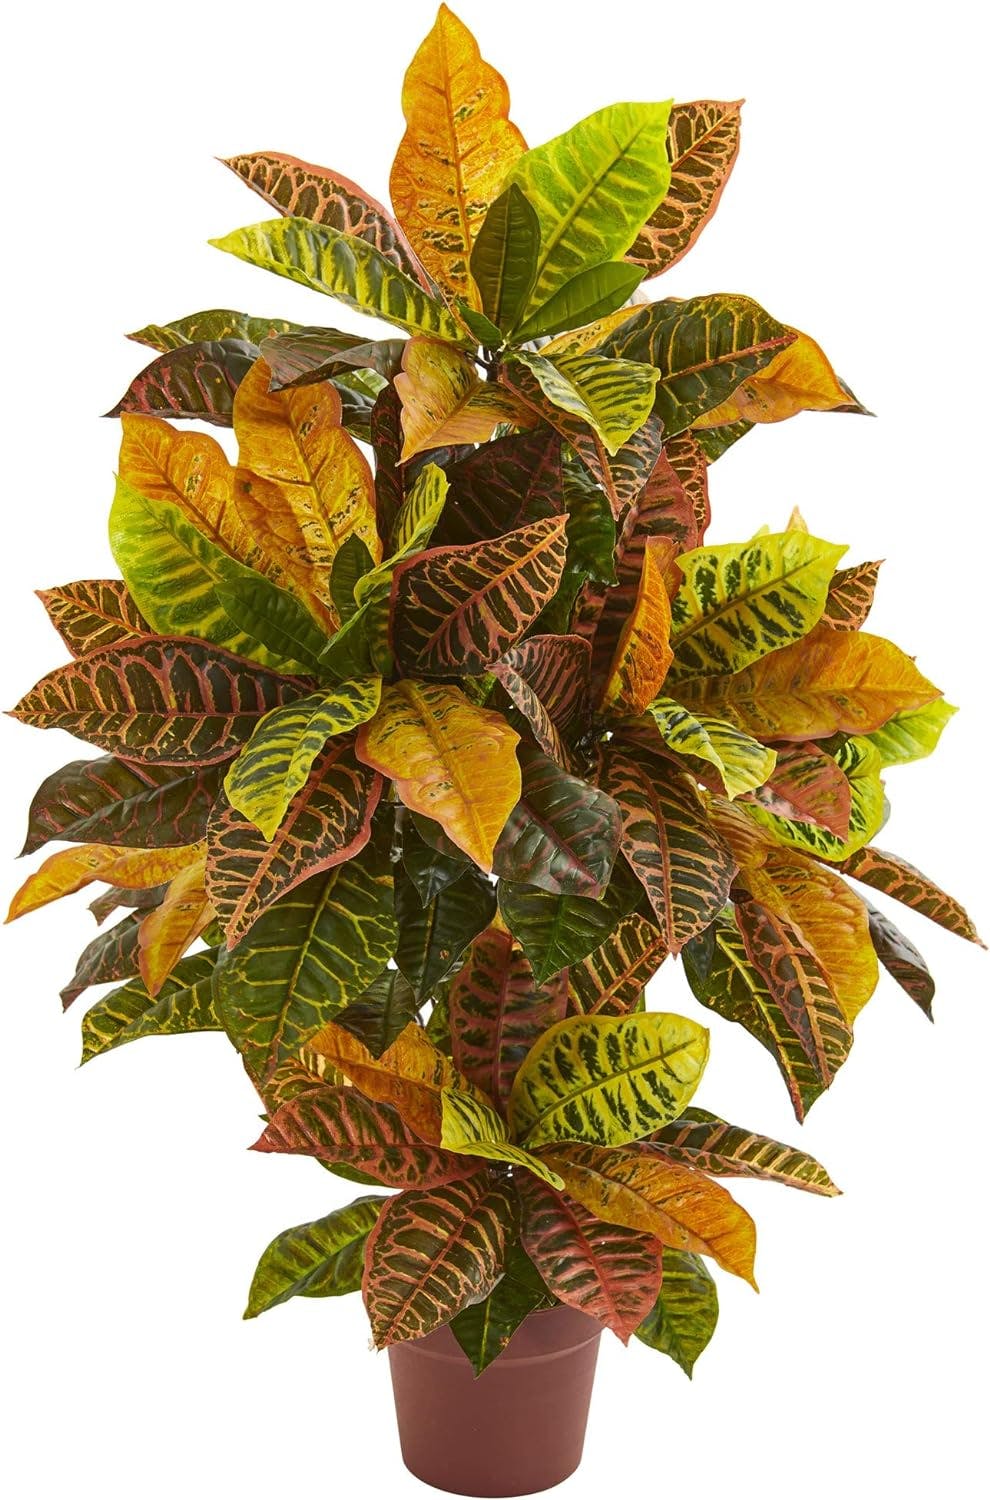 Sunset Serenity 37" Silk Croton Outdoor Potted Arrangement